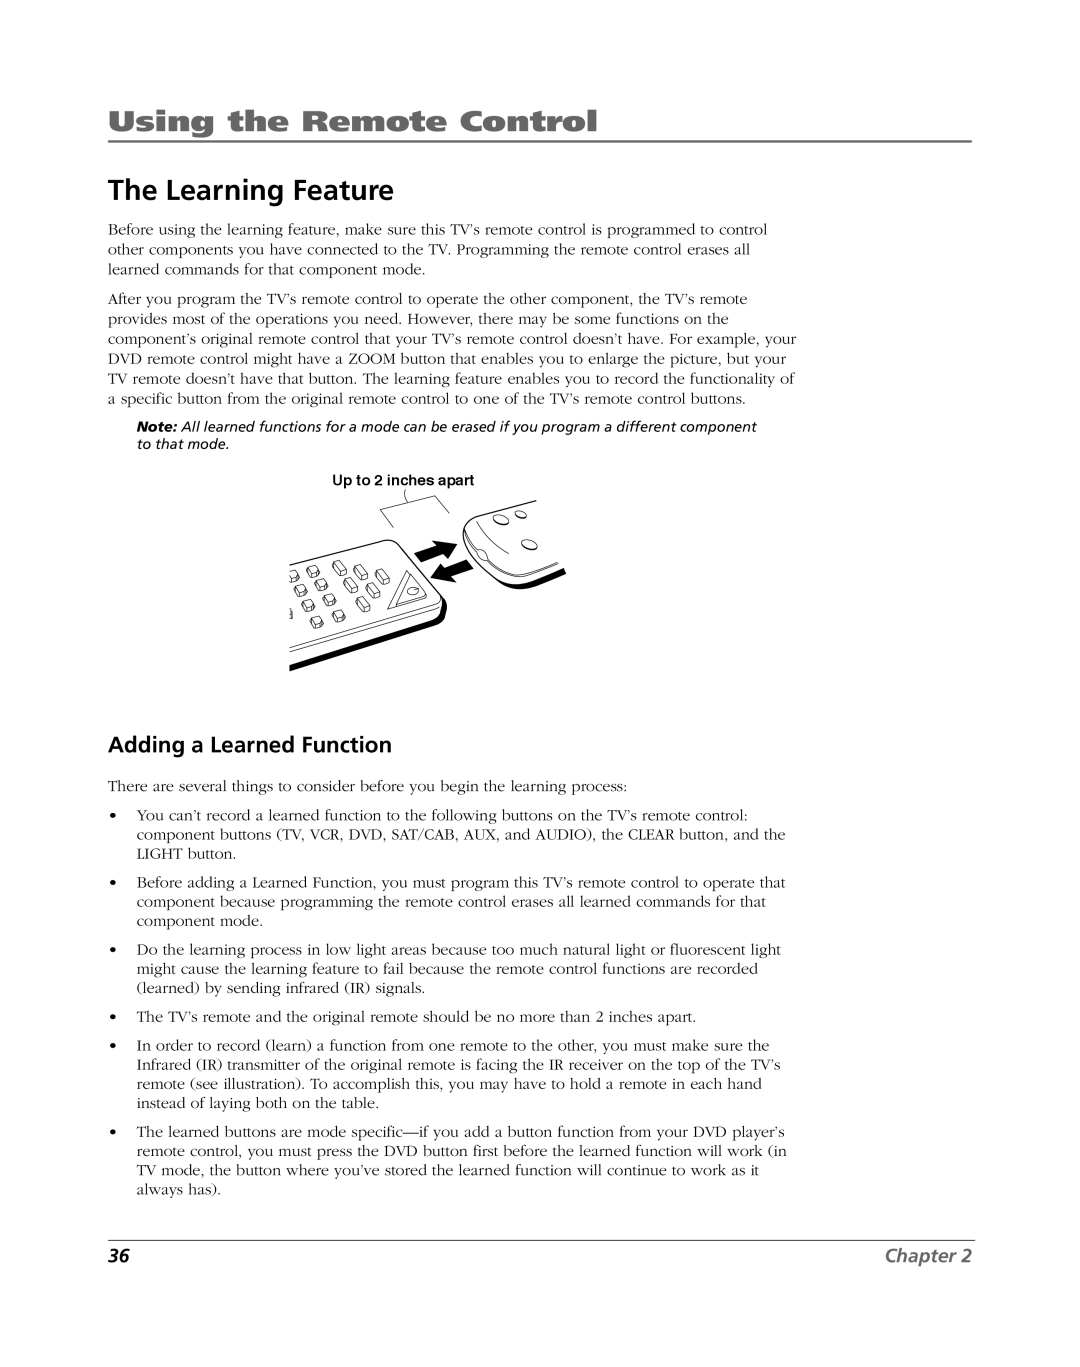 RCA HDLP61 manual Learning Feature, Adding a Learned Function 